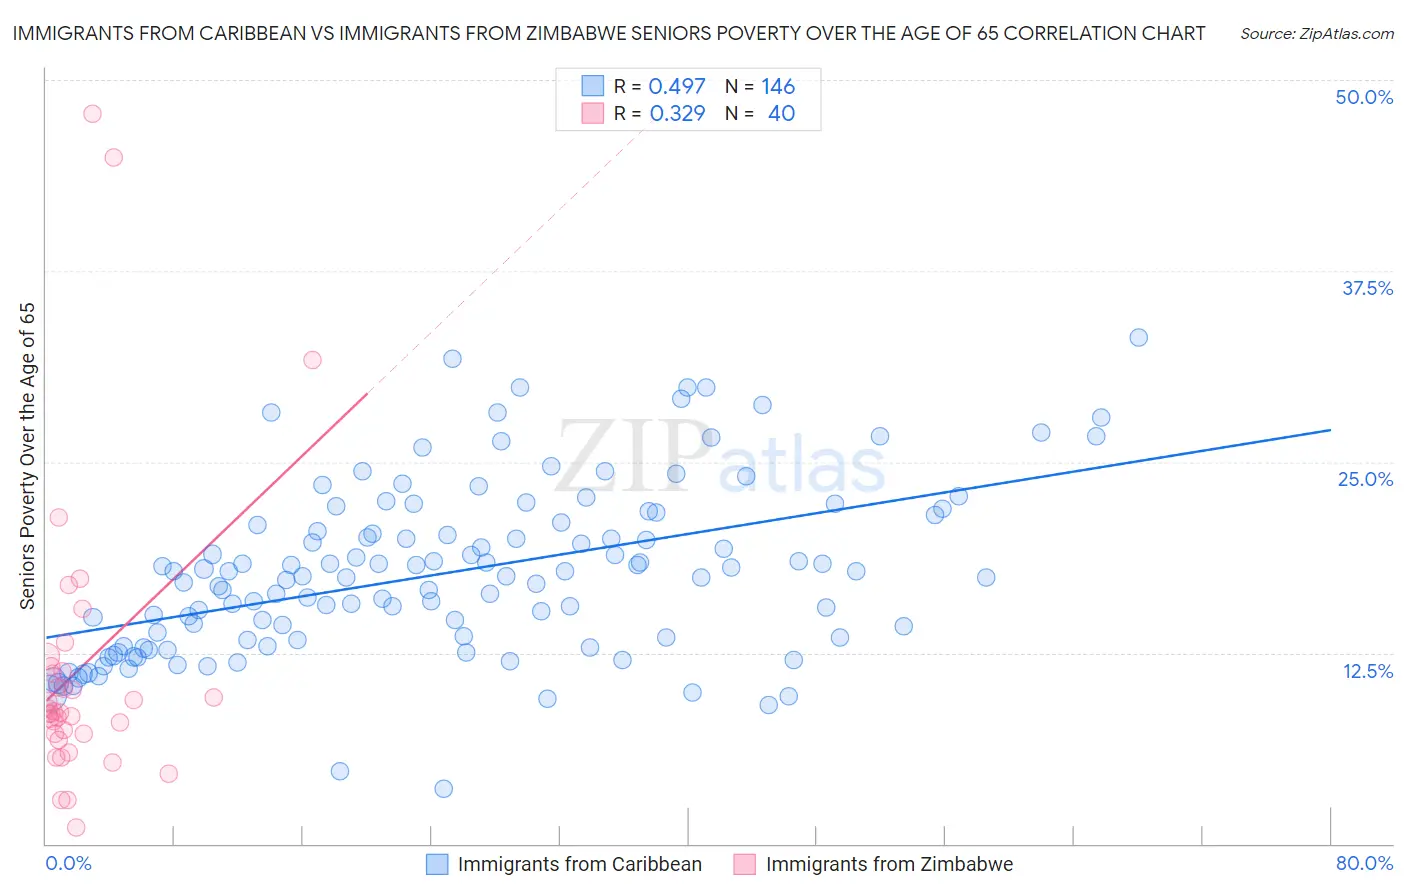 Immigrants from Caribbean vs Immigrants from Zimbabwe Seniors Poverty Over the Age of 65